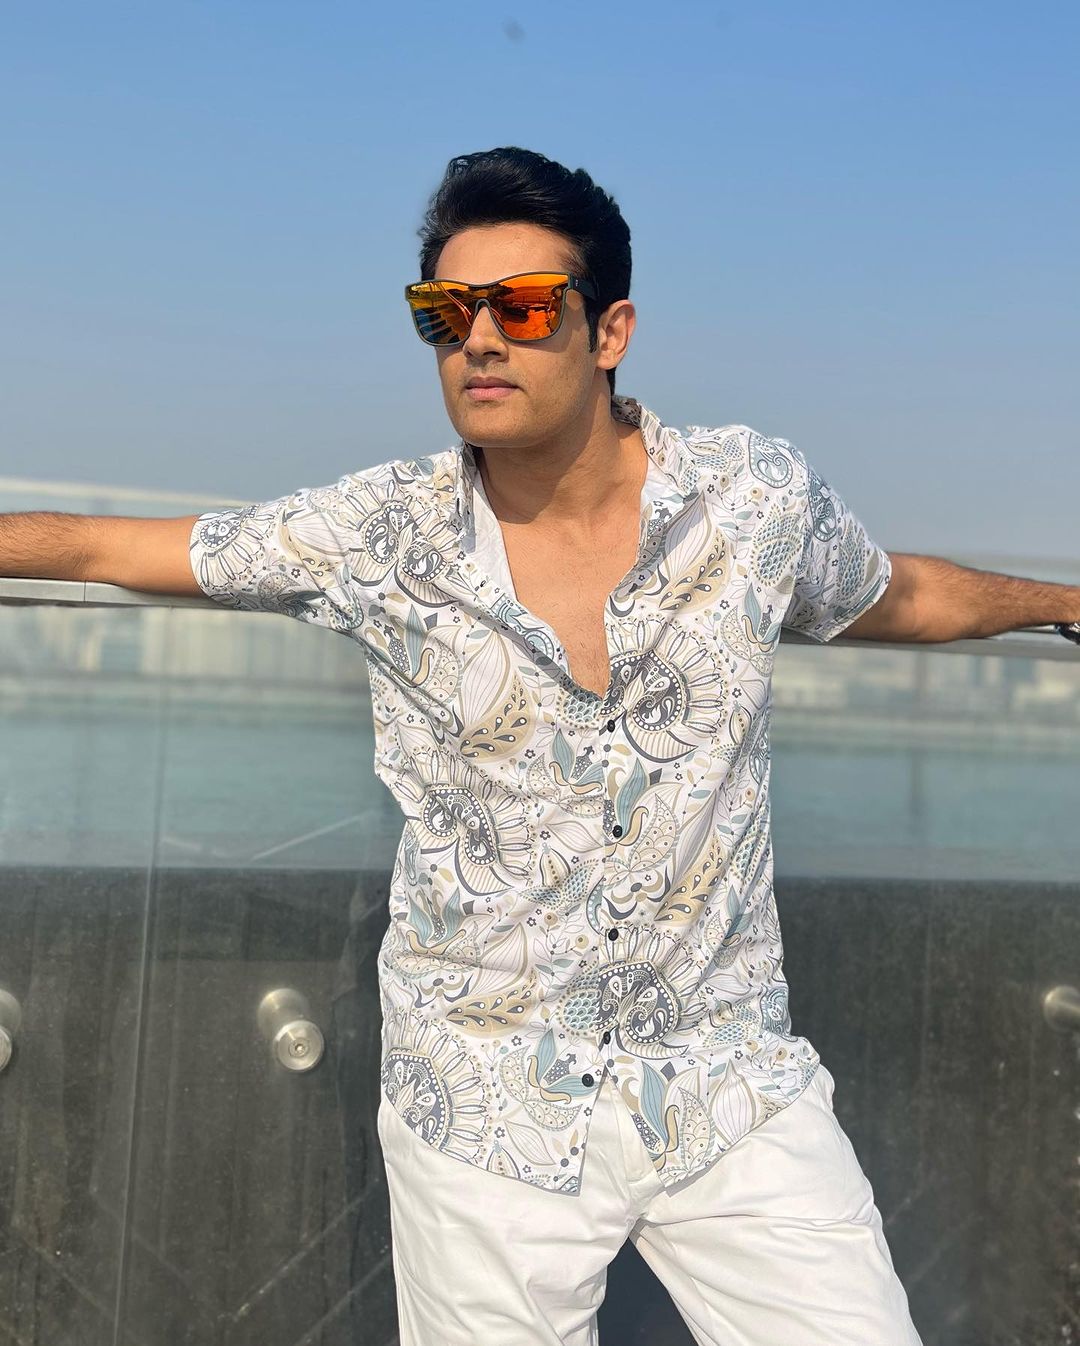 Handsome Actor Vishal Nayak Is On Playing A Grey Character In Baatein Kuch Ankahee Si. He Says About Receiving Both Love And Hate From The Audiences!